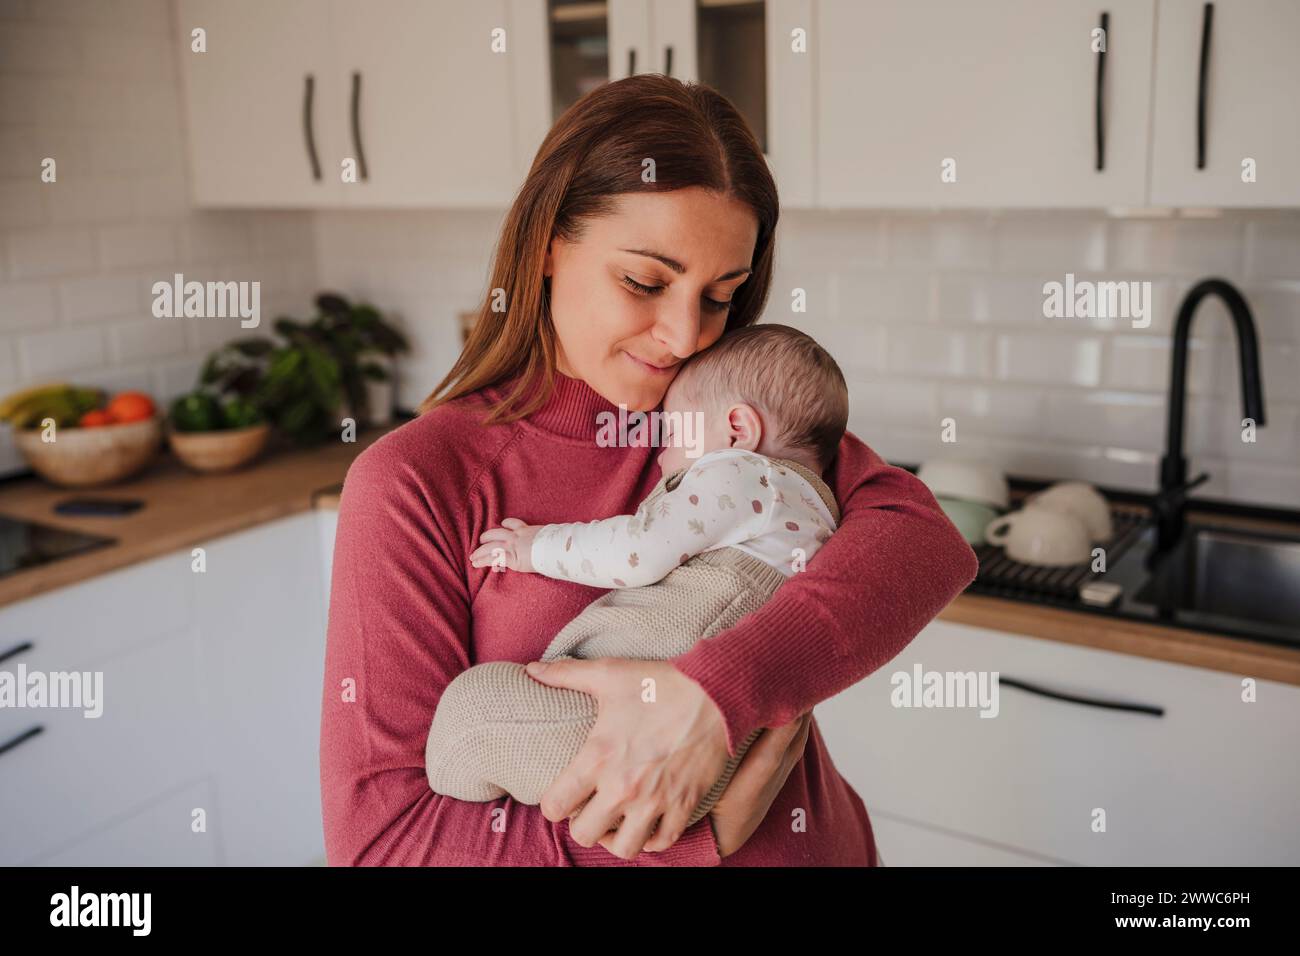 Smiling woman embracing baby daughter in kitchen Stock Photo